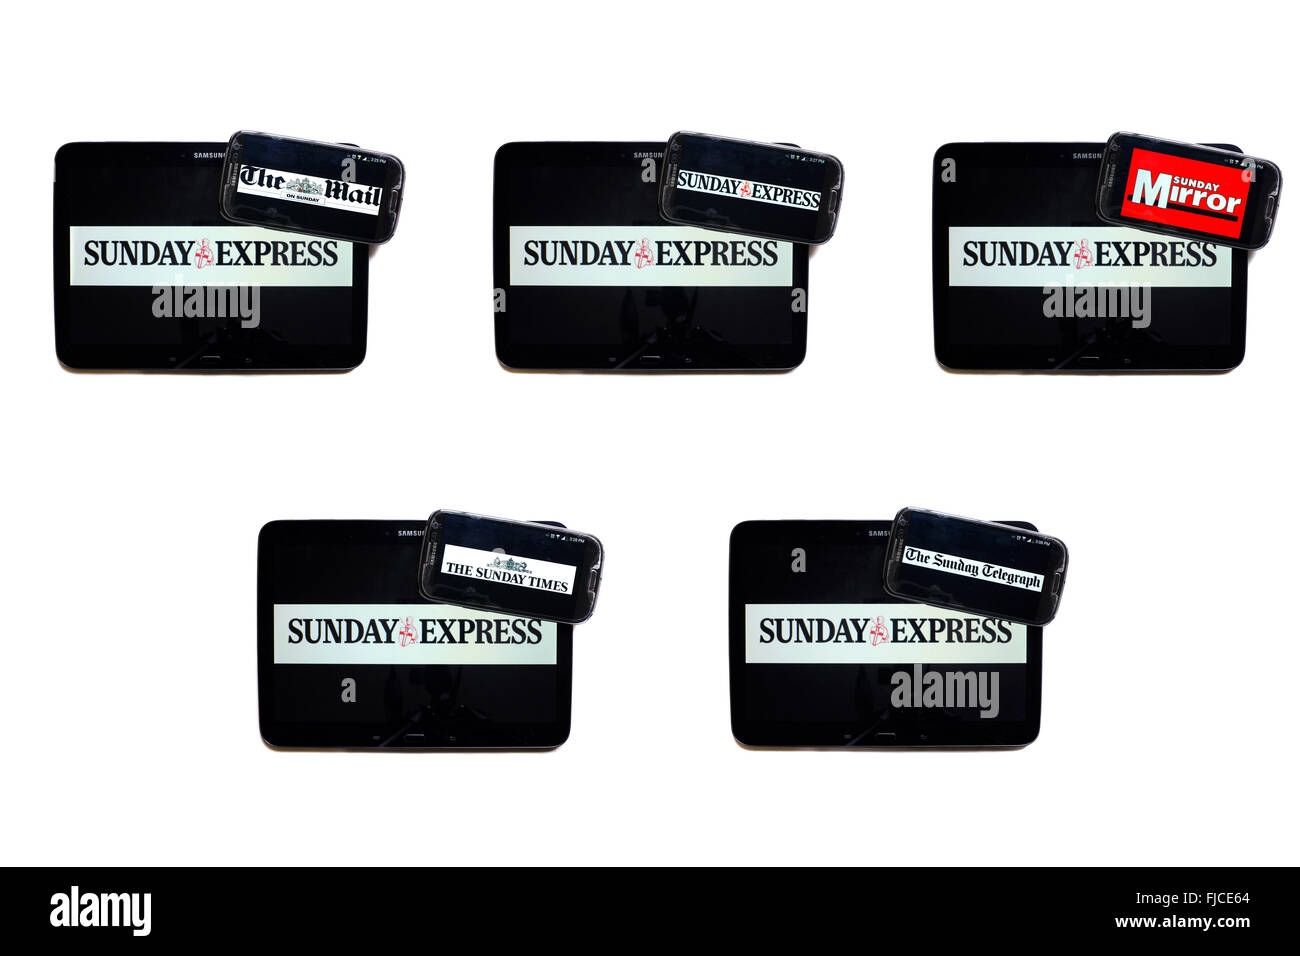 The Sunday Express newspaper logo on tablet screens surrounded by smartphones displaying the logos of rival Sunday newspapers. Stock Photo